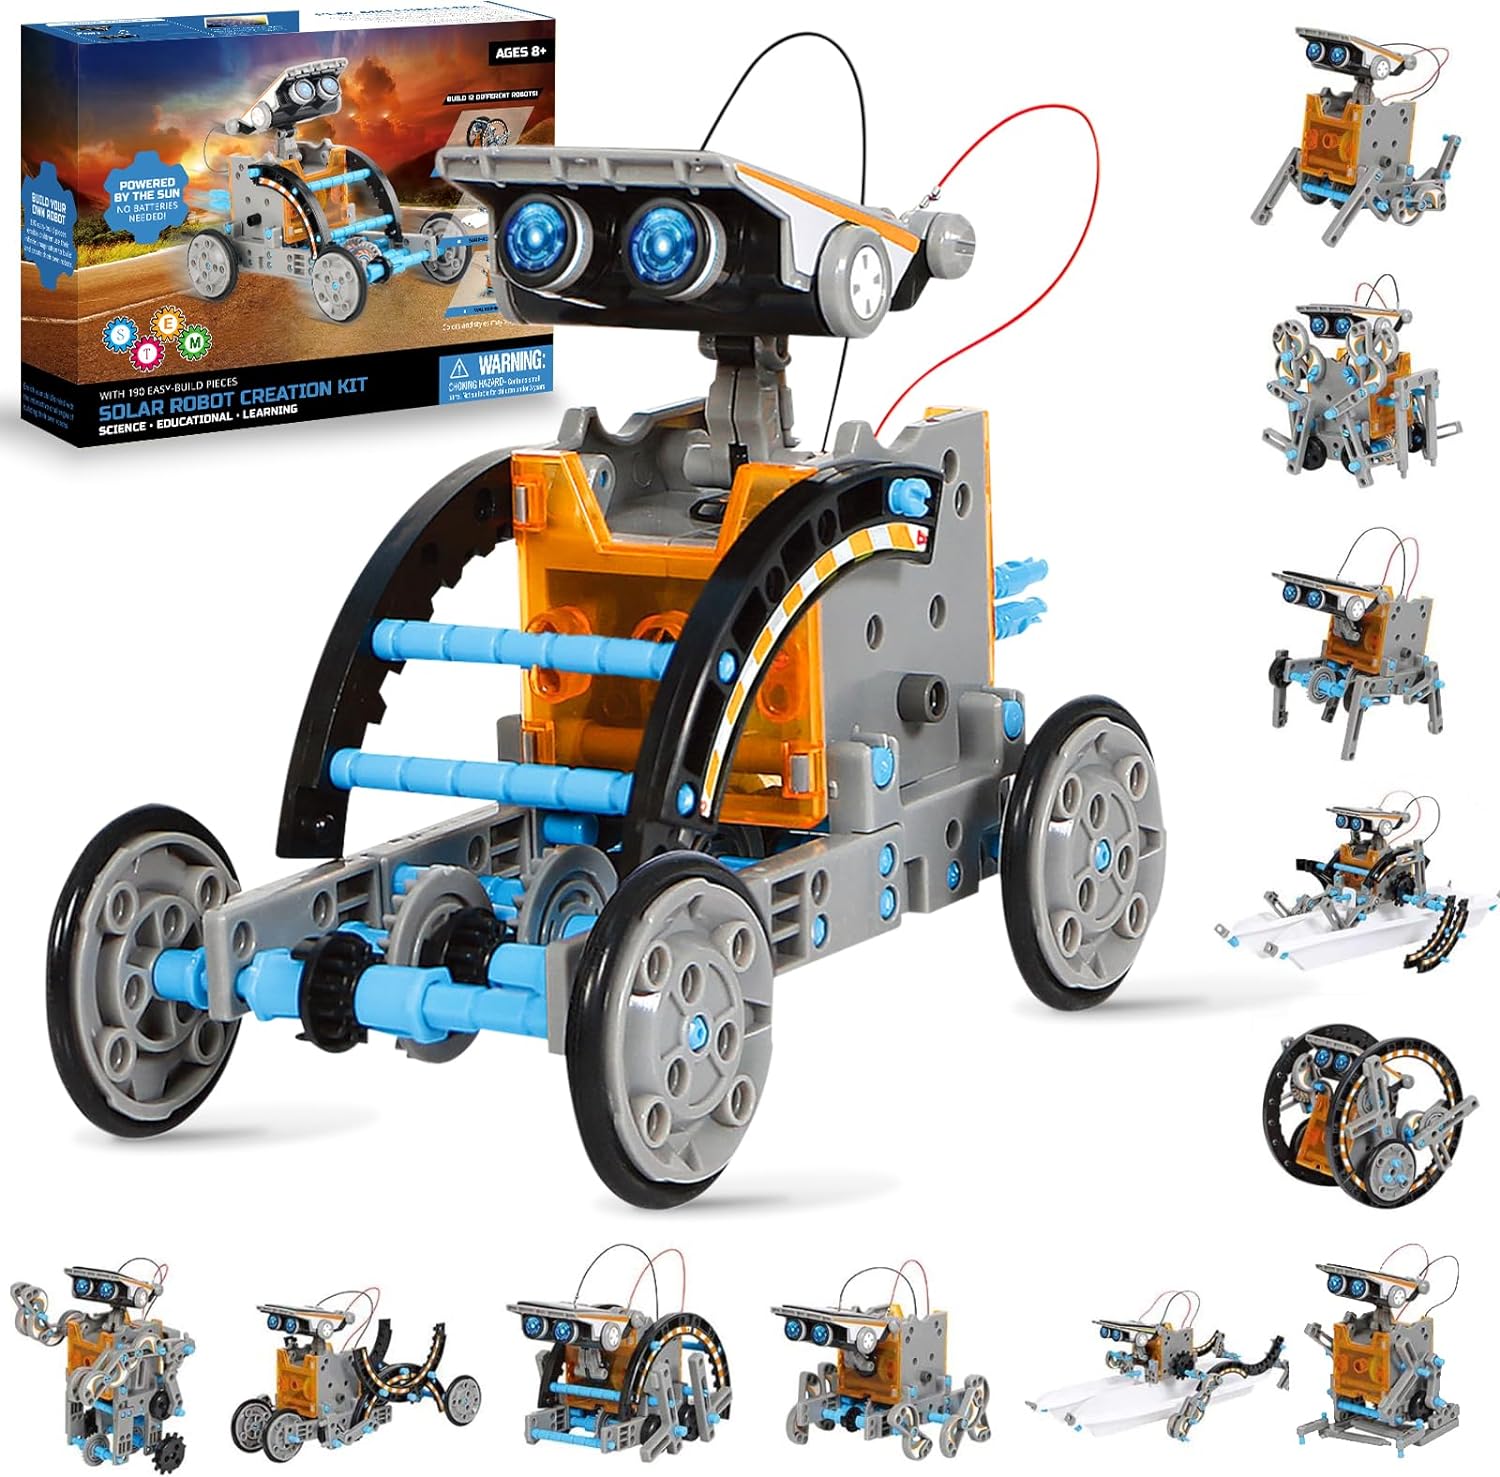 Sillbird 12-in-1 STEM Solar Robot Toys for Boys Age 8-12, Educational Science Building Toy Kits for Kids, Gifts for Boys and Girls Aged 8 9 10 11 12 Years Old